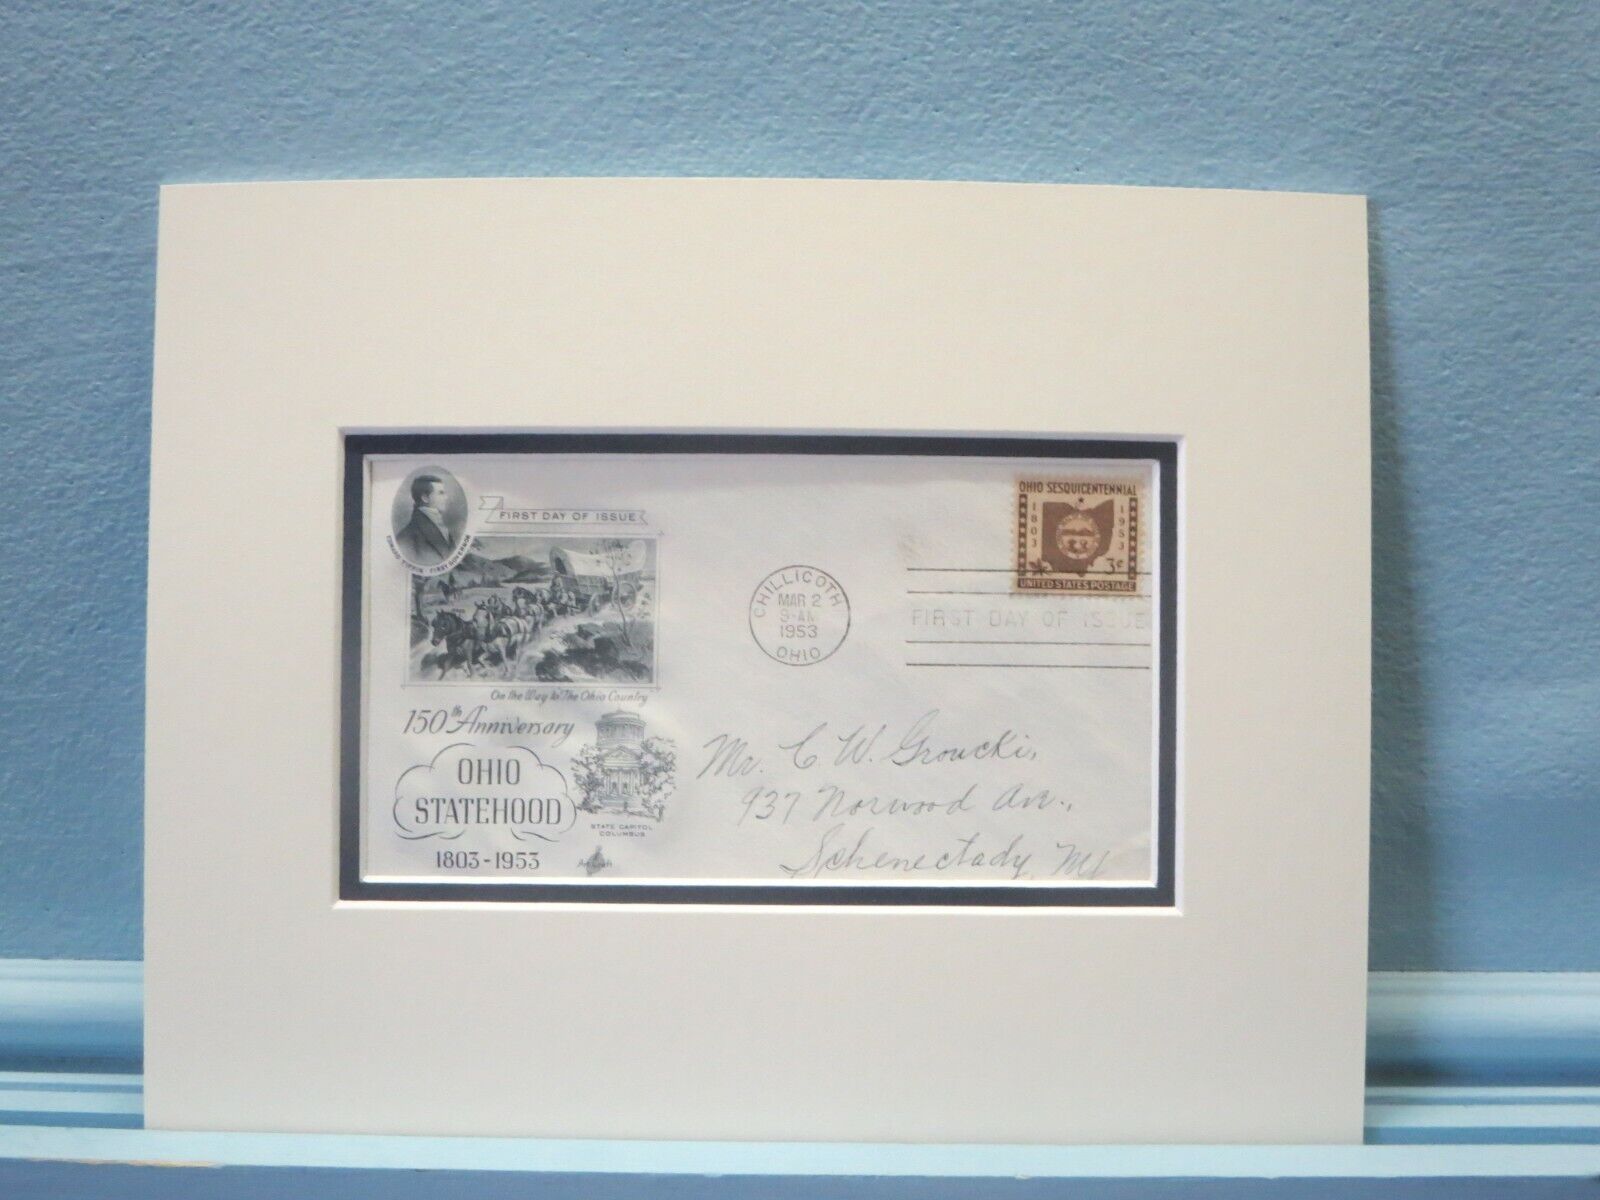 First Day Cover of the stamp honoring the 150th Anniversary of Ohio Statehood